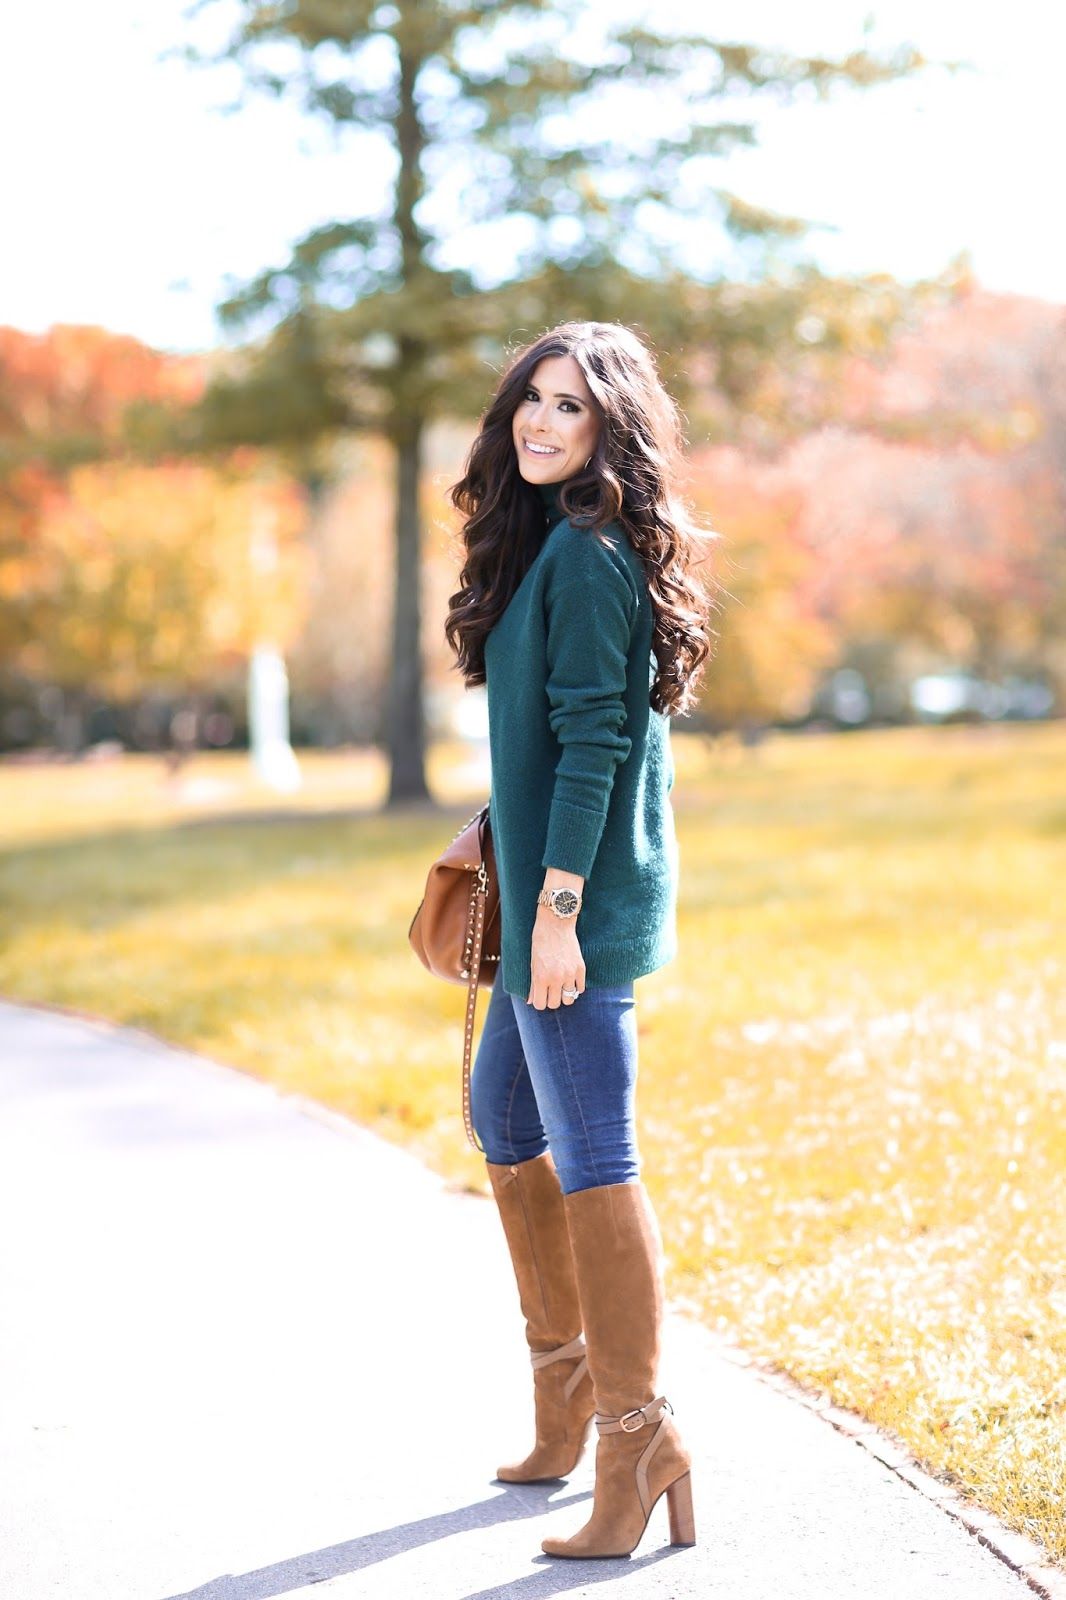 Fall Sweater and Outfit Ideas
  for Women